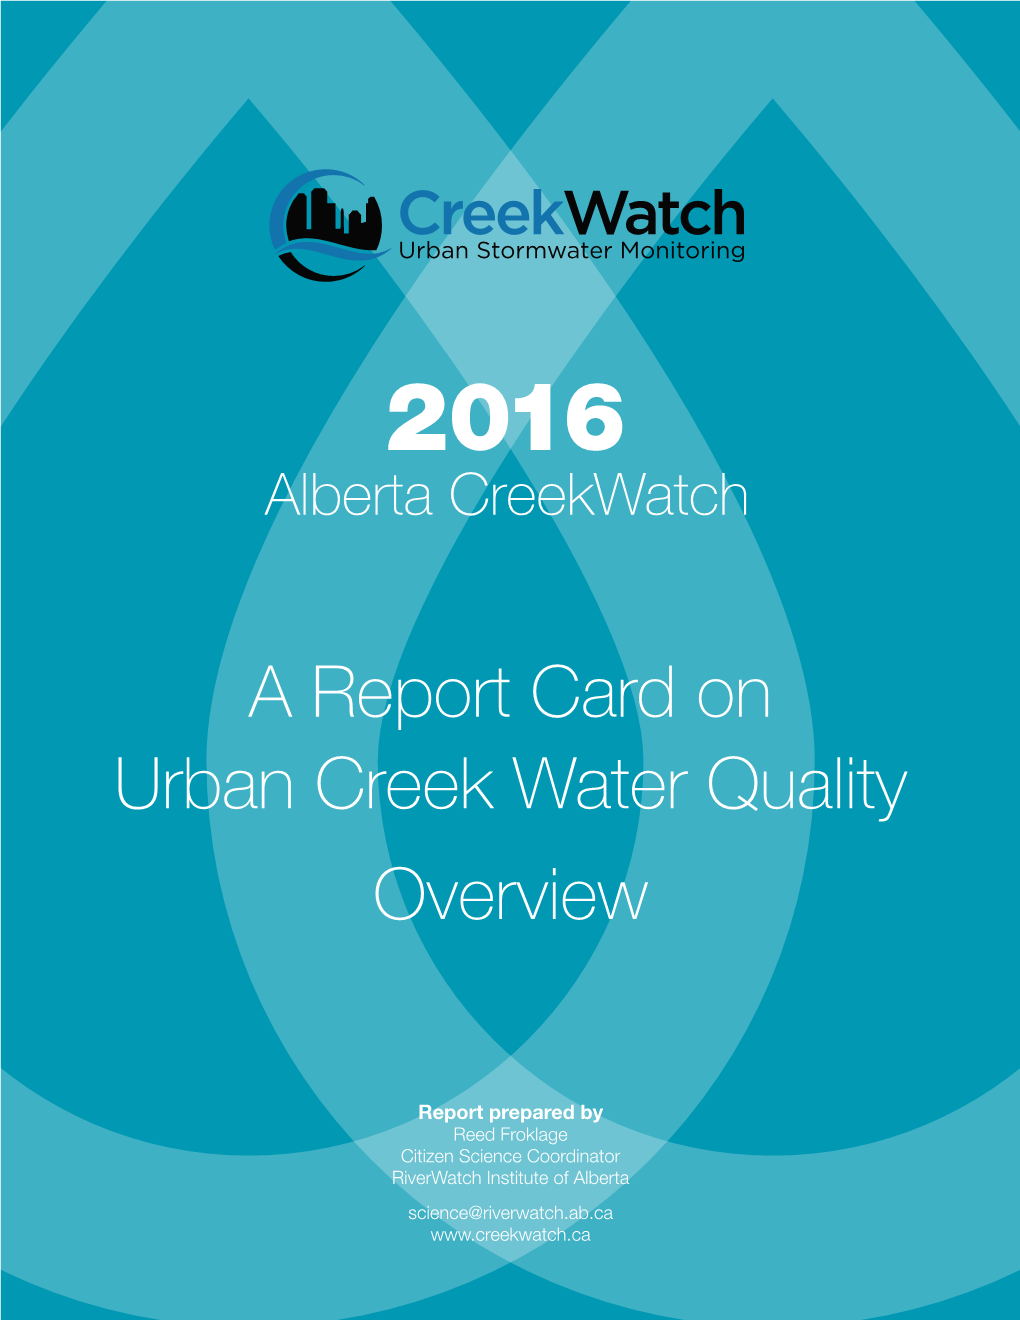 A Report Card on Urban Creek Water Quality Overview